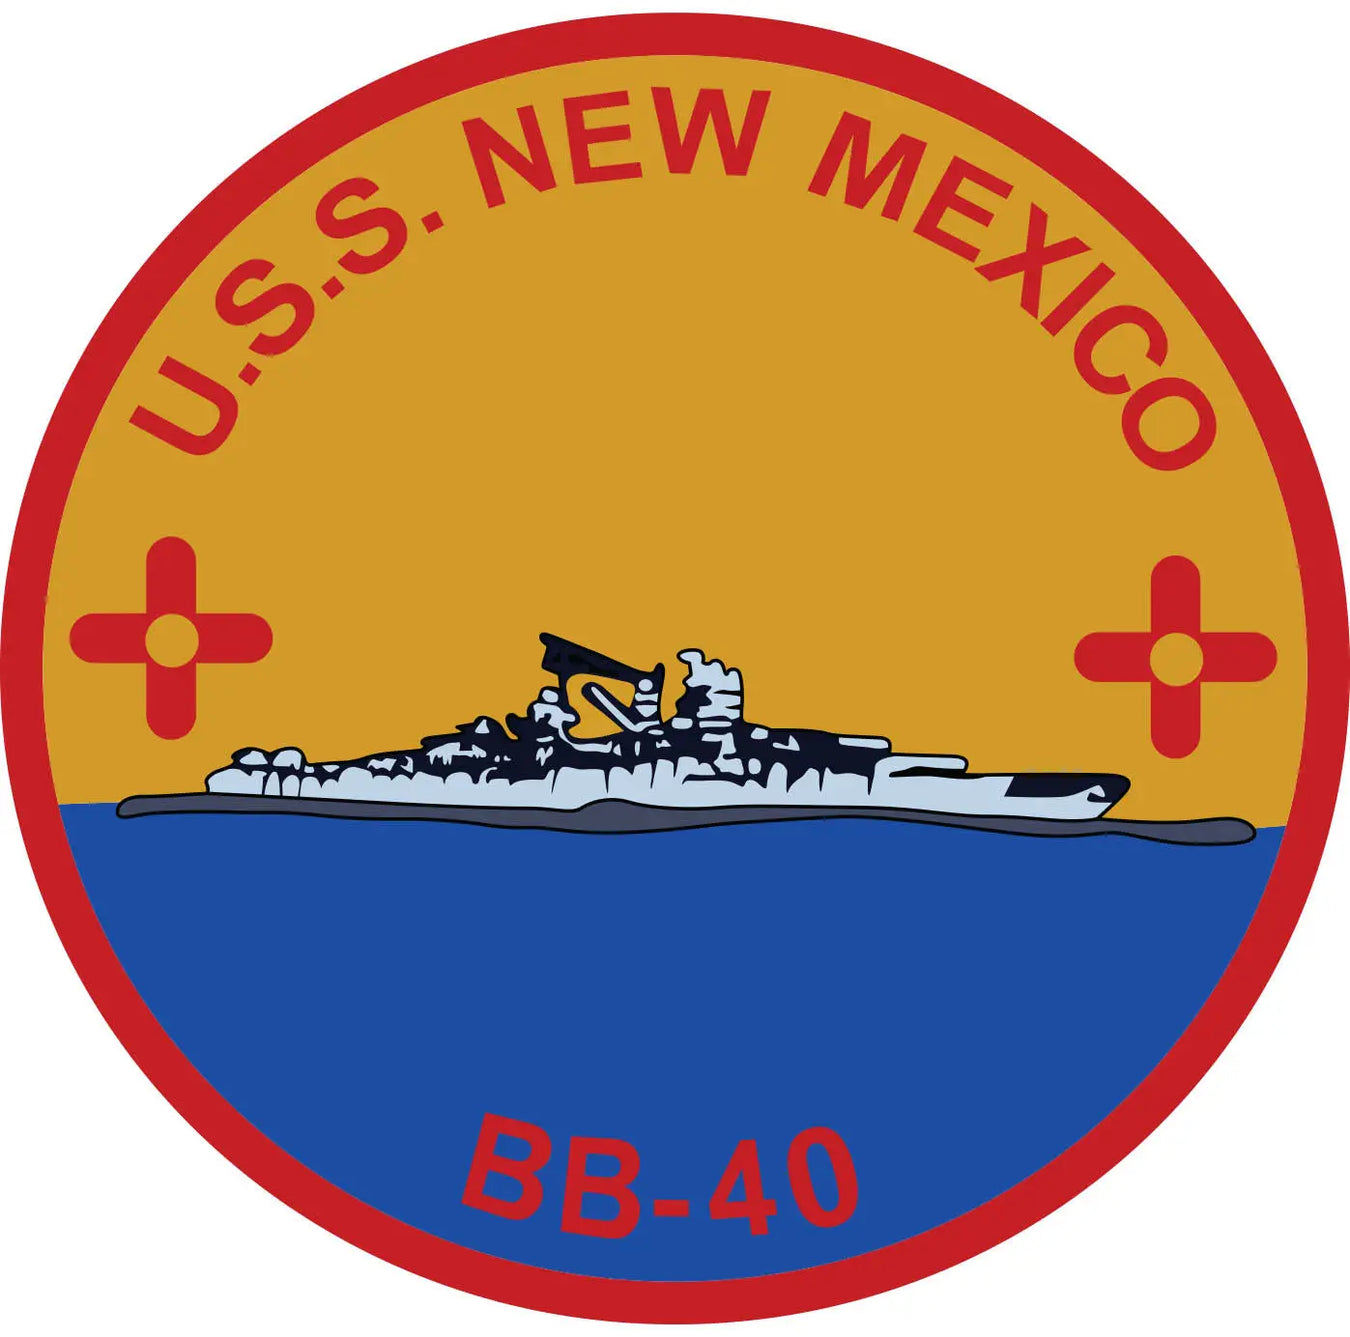 USS New Mexico (BB-40) Merchandise - Shop T-Shirts, hoodies, patches, pins, flags, decals, hats and more.